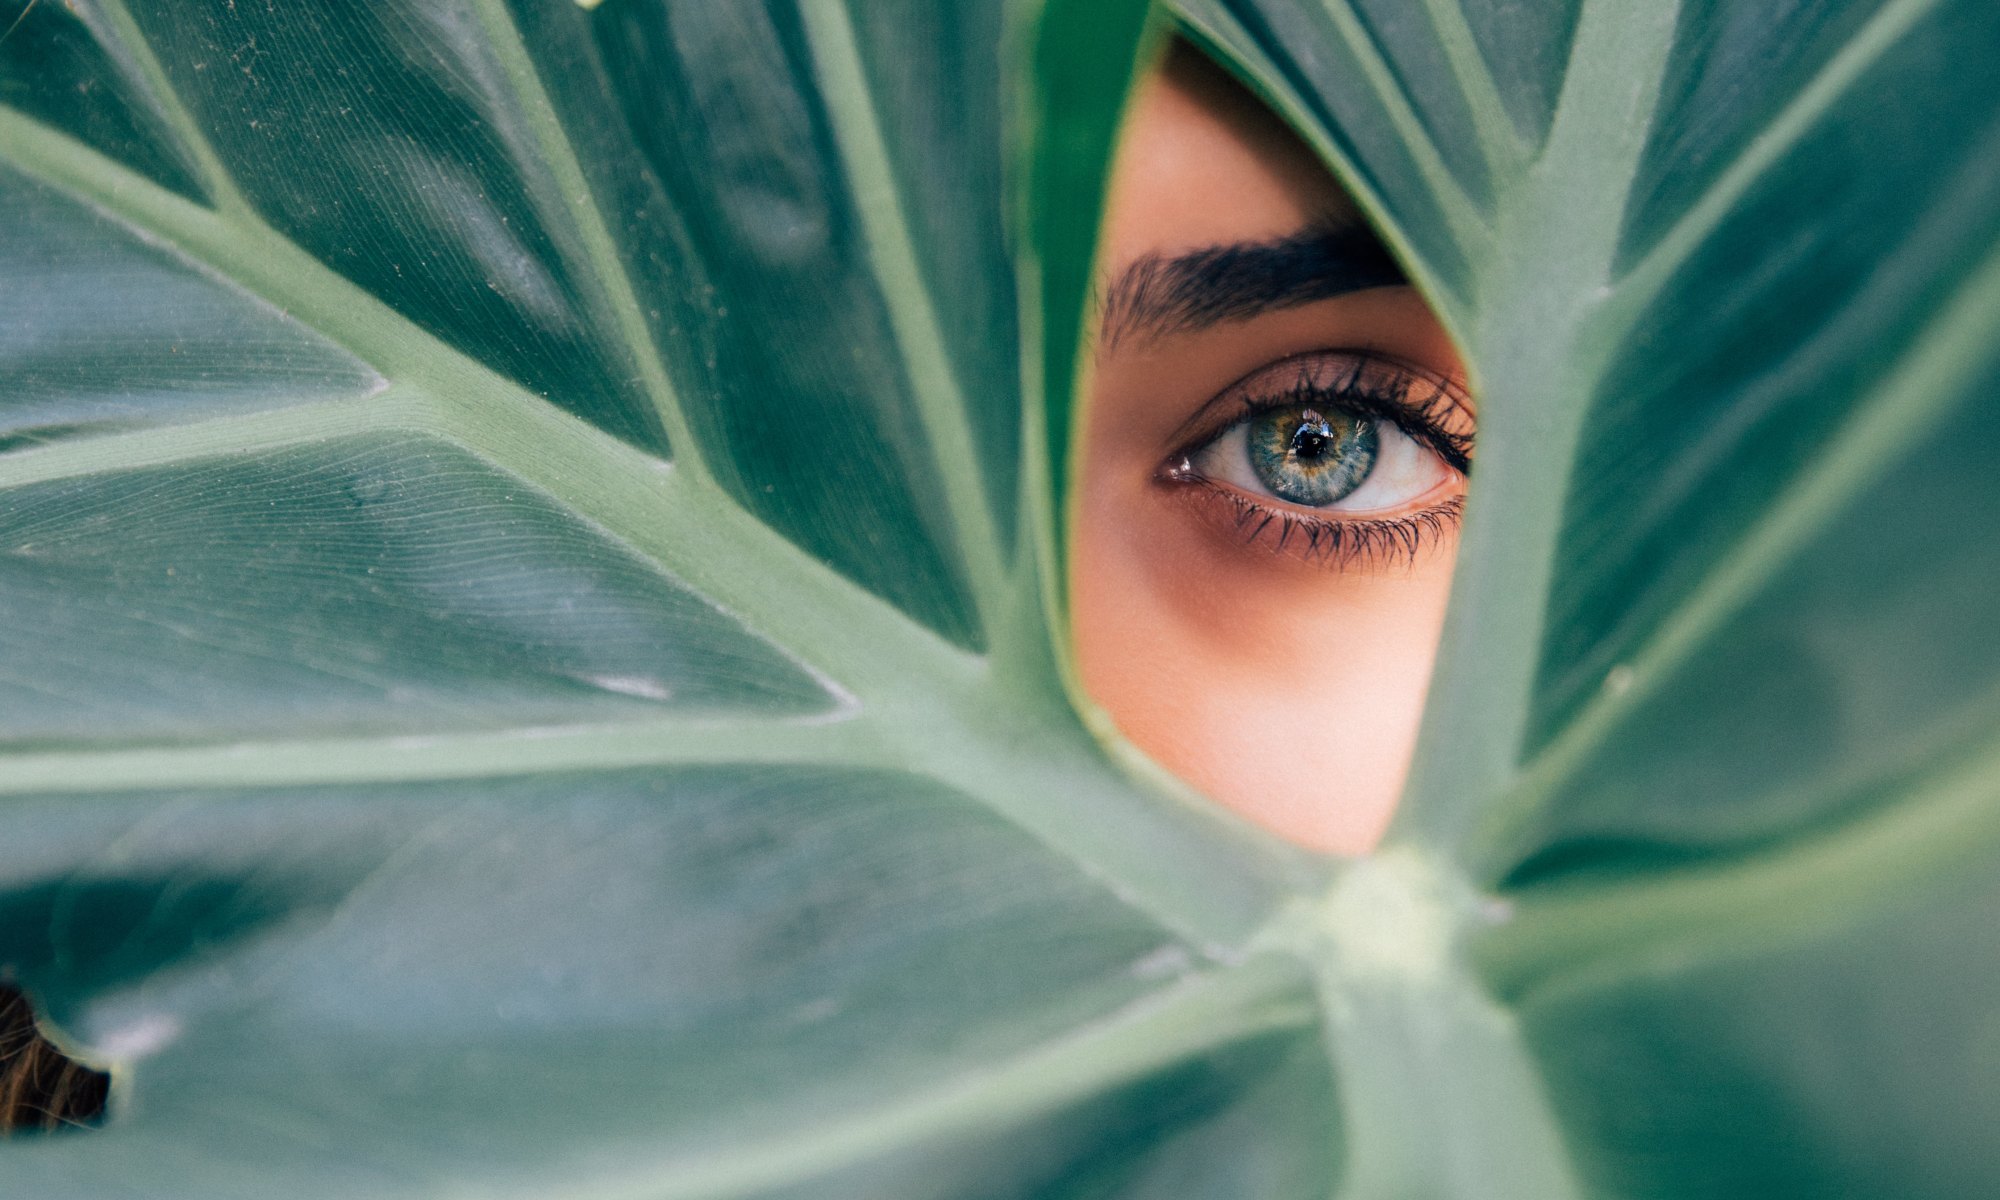 woman with green eye peaking through green plants